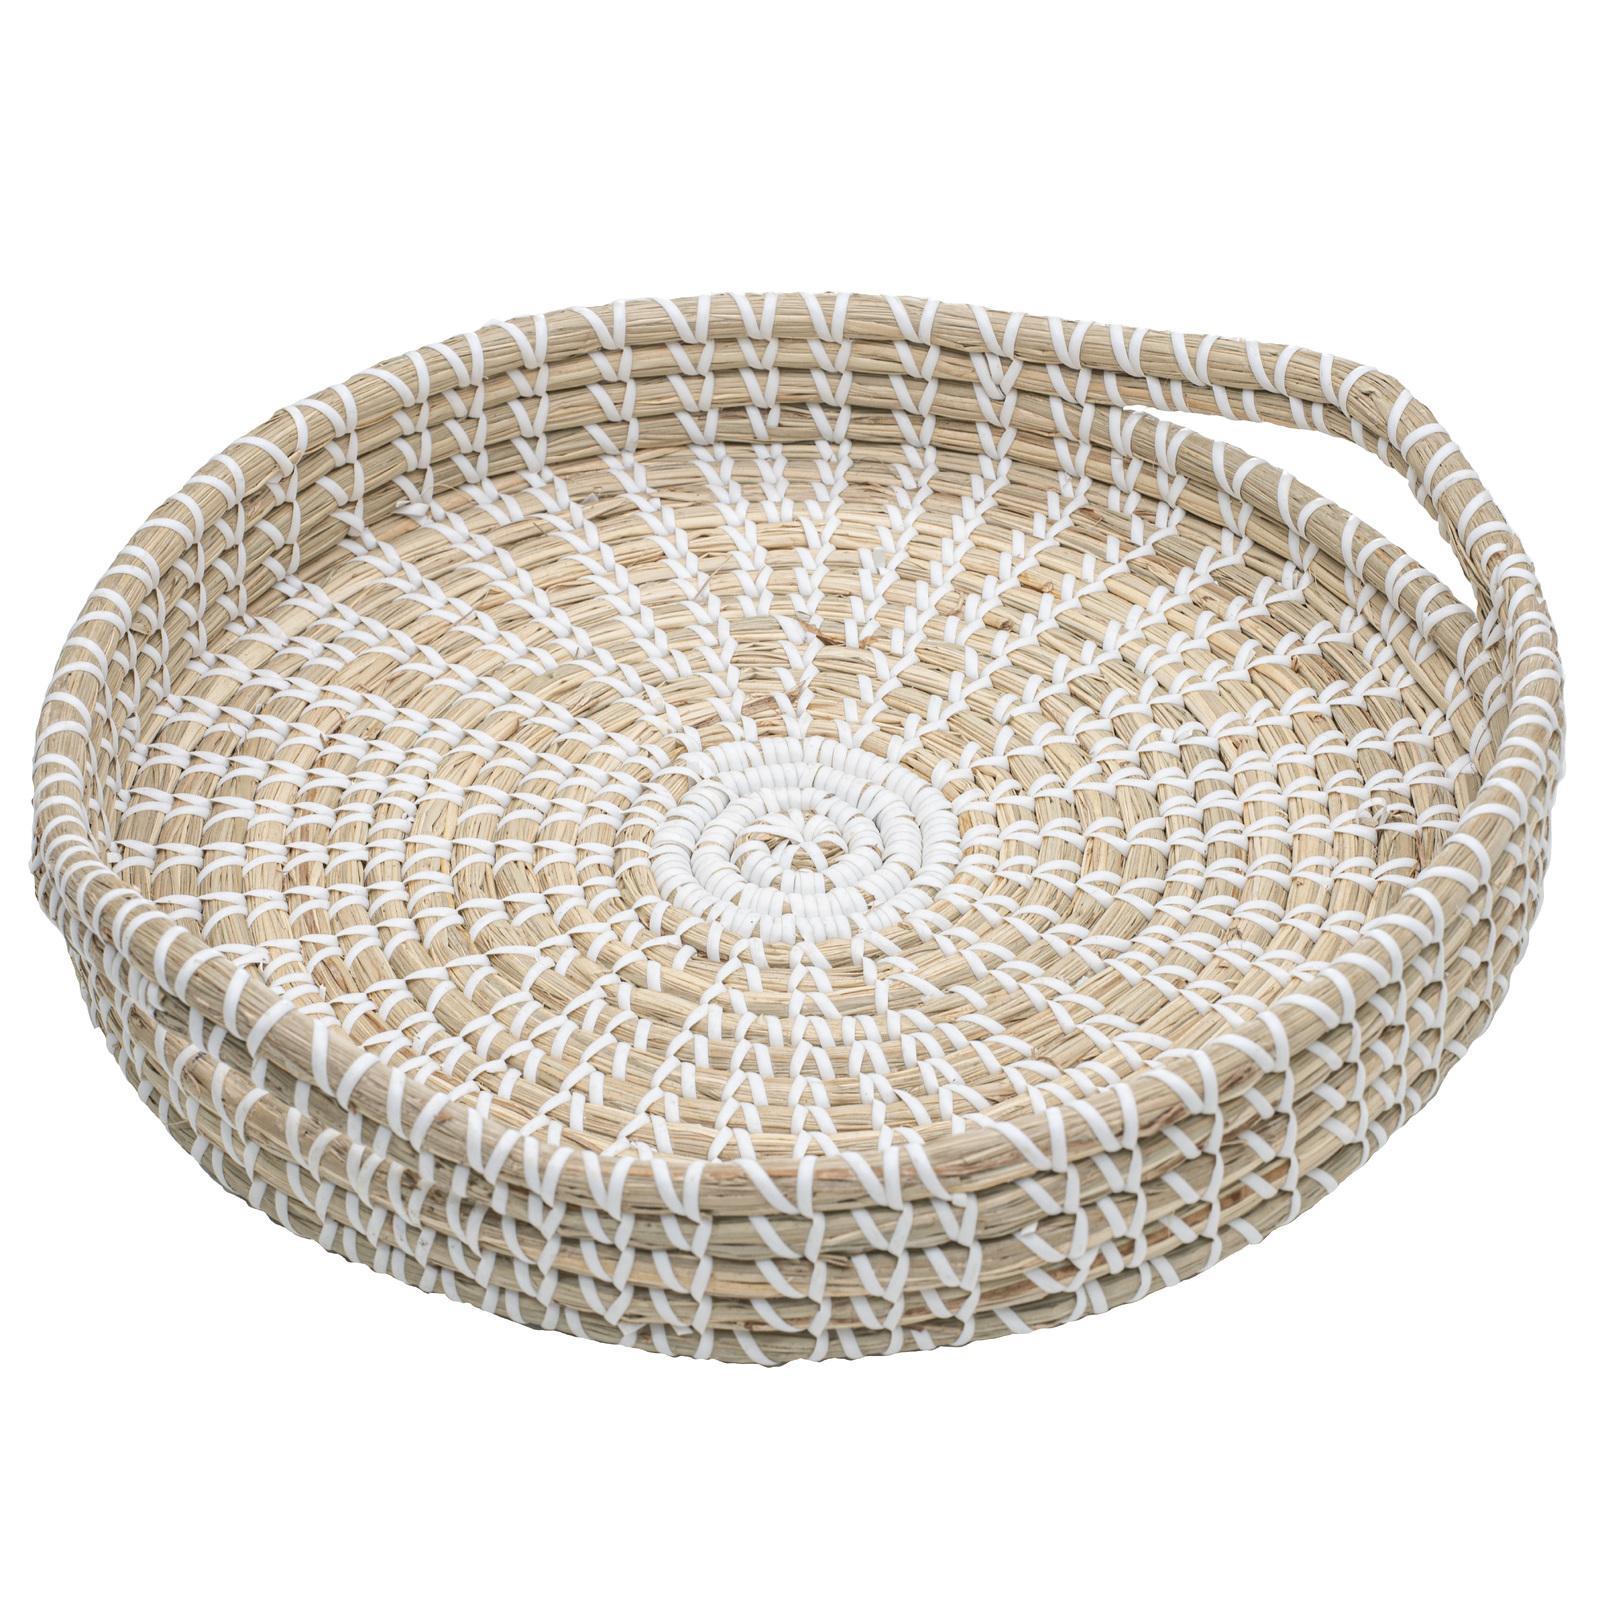 Ladelle Seagrass Woven Serving/Entertaining Handcrafted Tray 35x35x8cm White